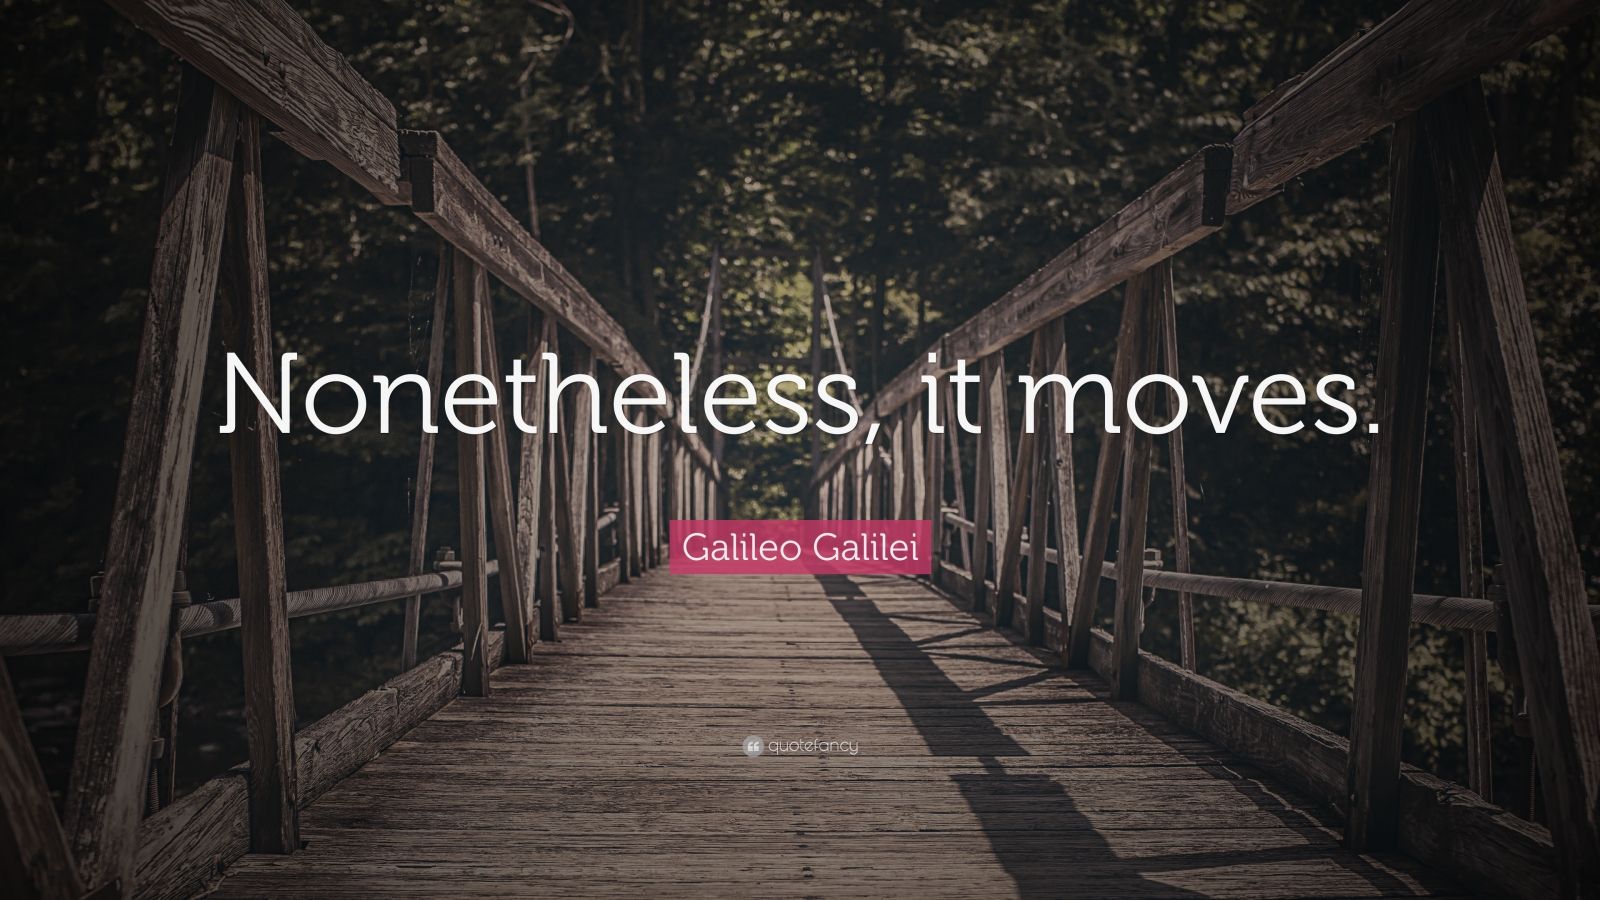 galileo galilei and yet it moves